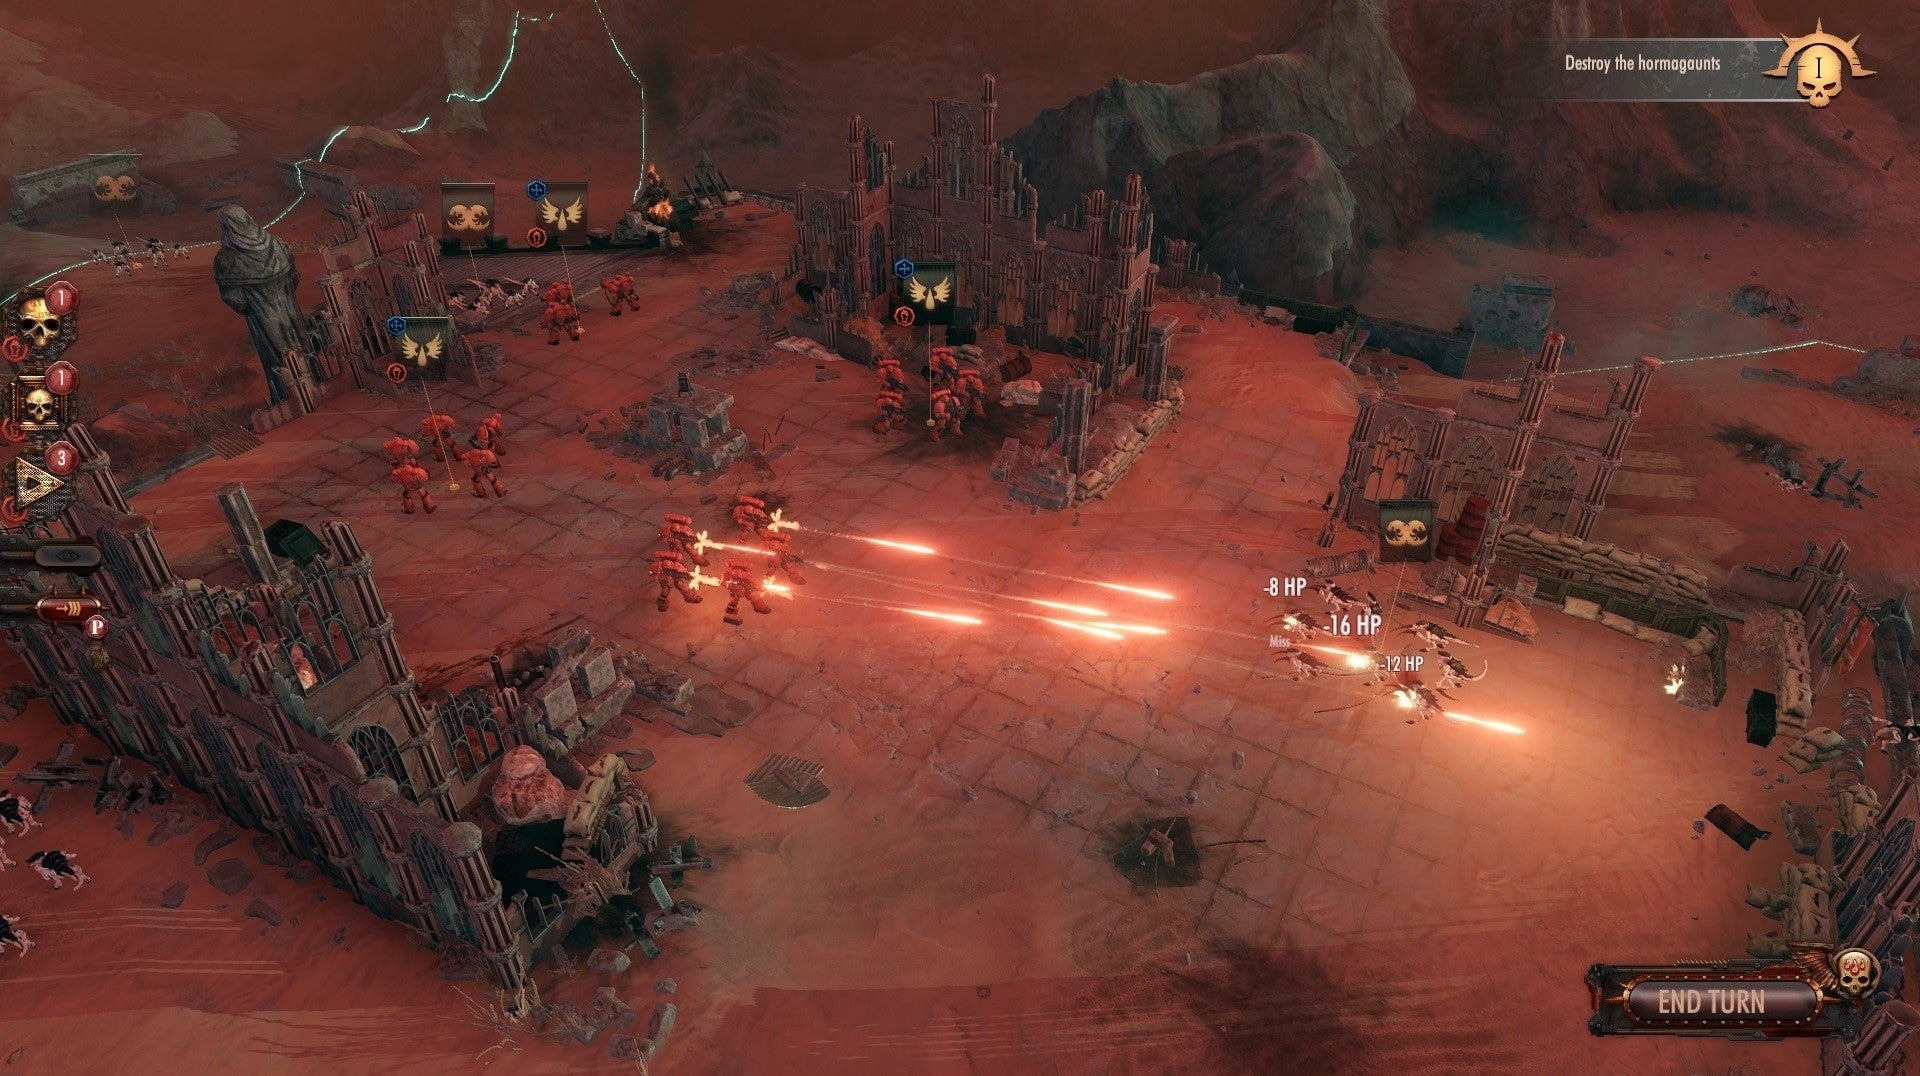 Image for Warhammer 40,000 Battlesector gameplay looks like a decent stab at mirroring the tabletop